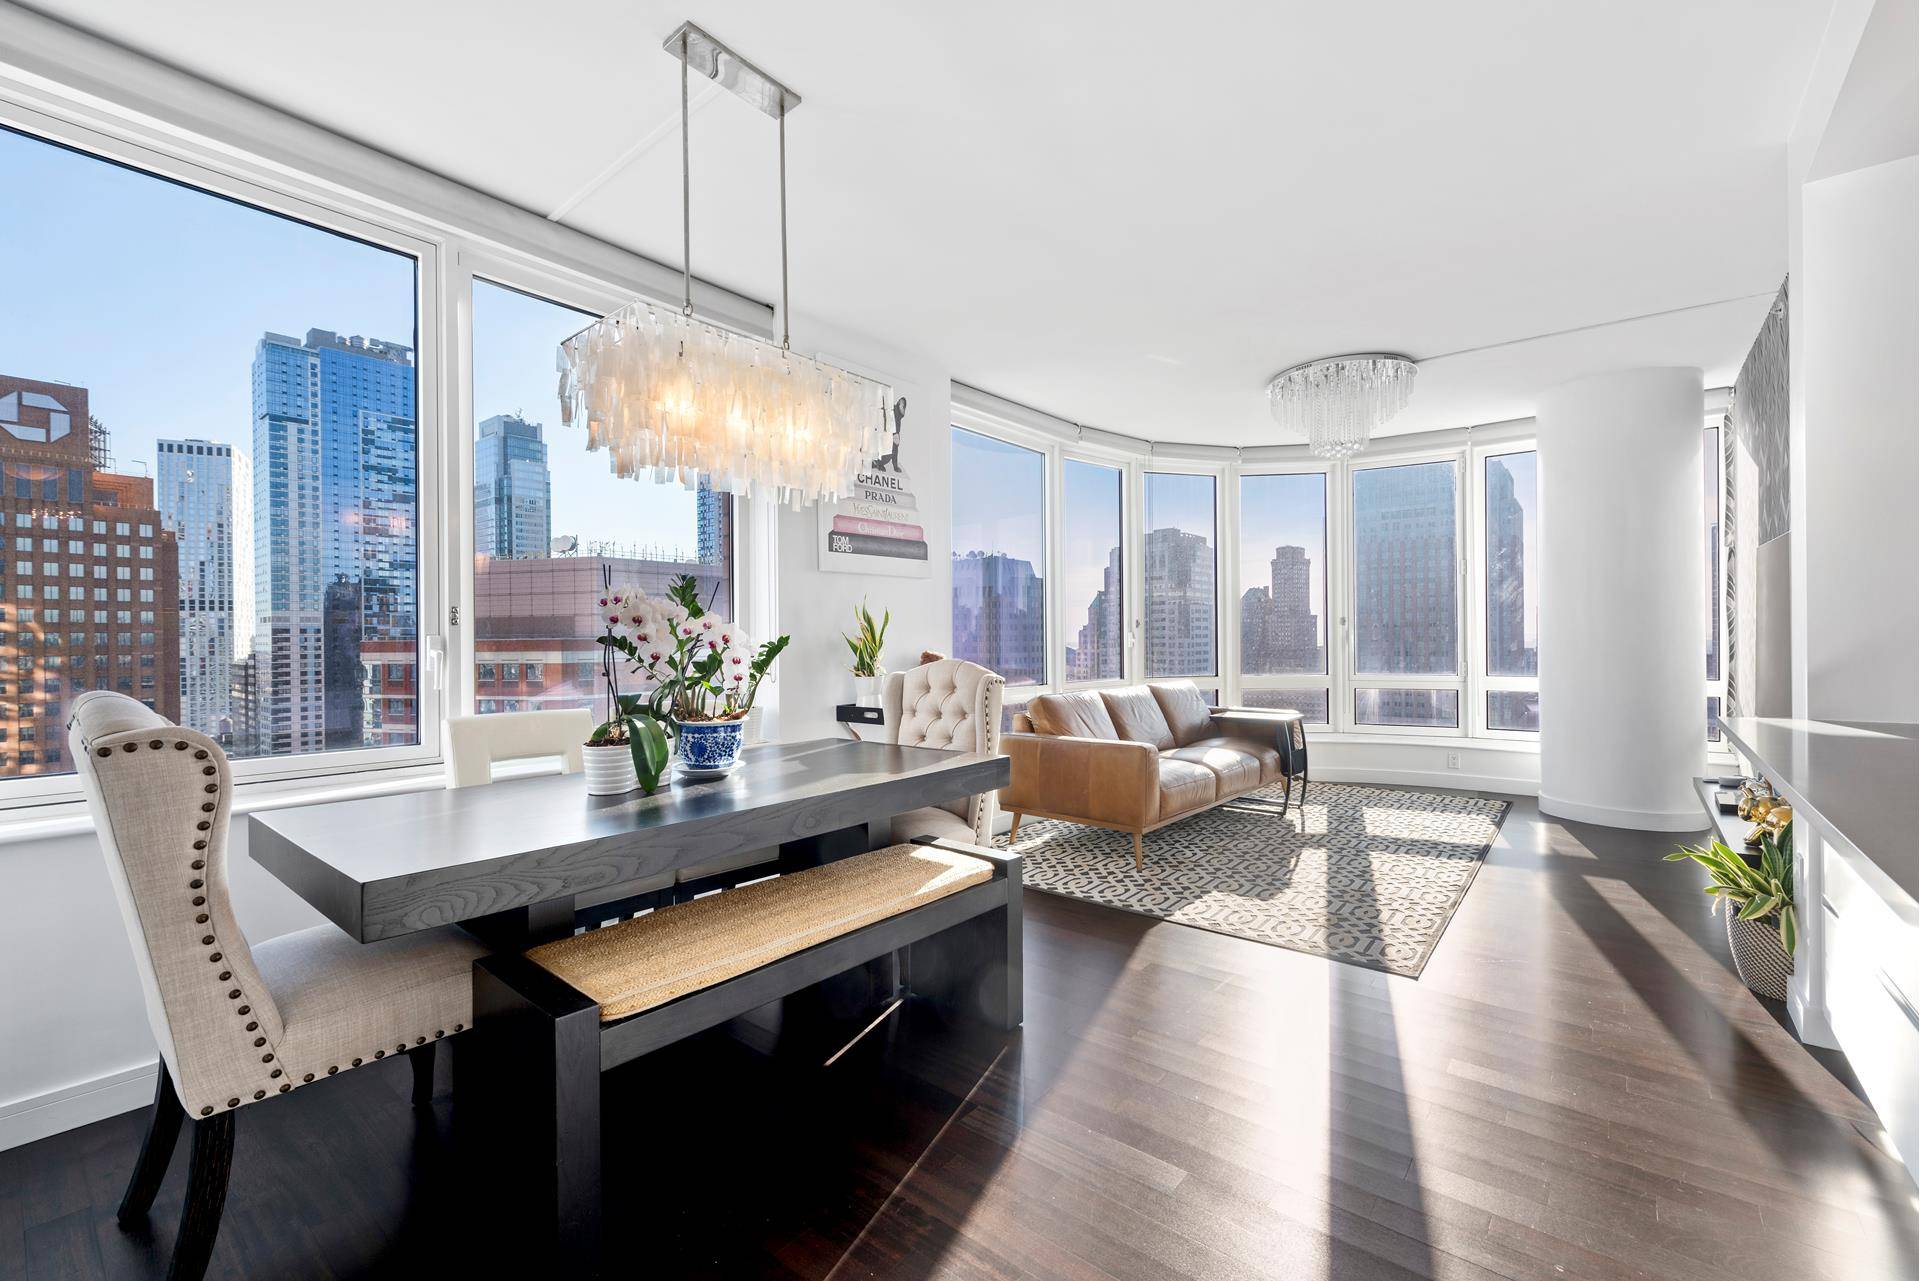 Stunning upgrades abound on this notably high floor 2 Bedroom 2 Bath at The Oro, Downtown Brooklyn's Premier Full Service Luxury Condominium.